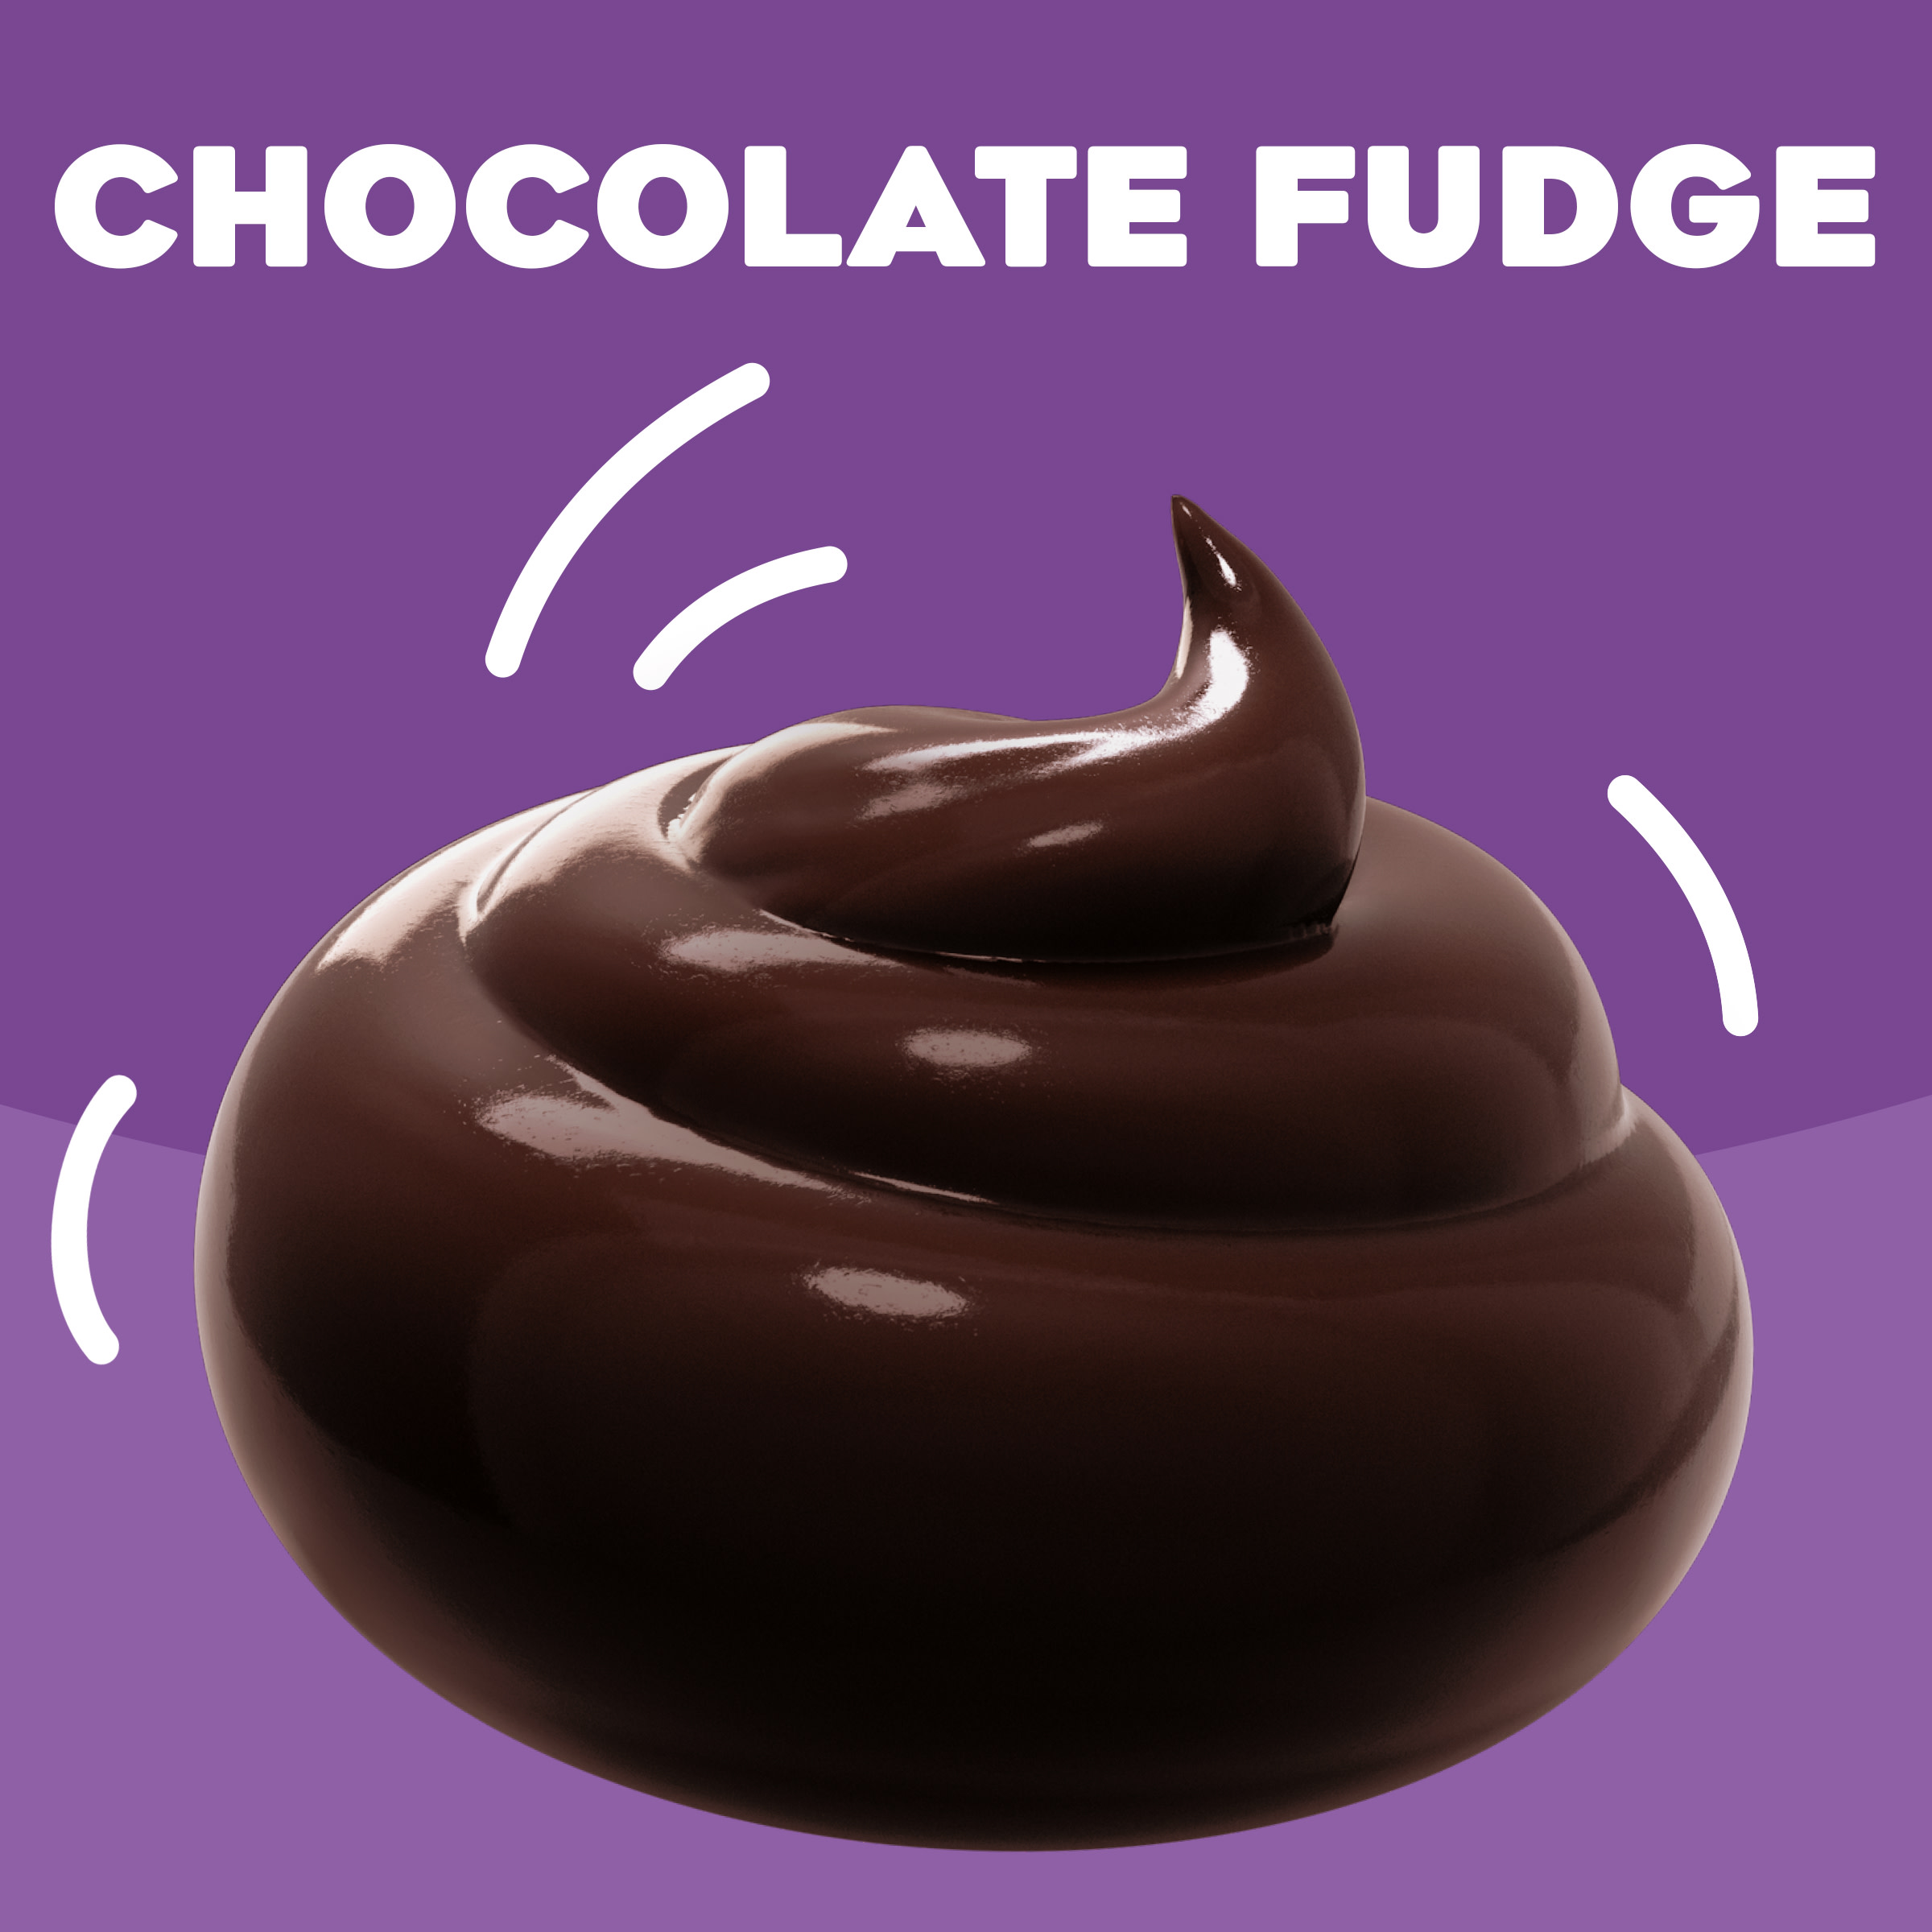 Jell-O Cook & Serve Chocolate Fudge Artificially Flavored Pudding & Pie Filling Mix, 3.4 oz Box - image 3 of 14